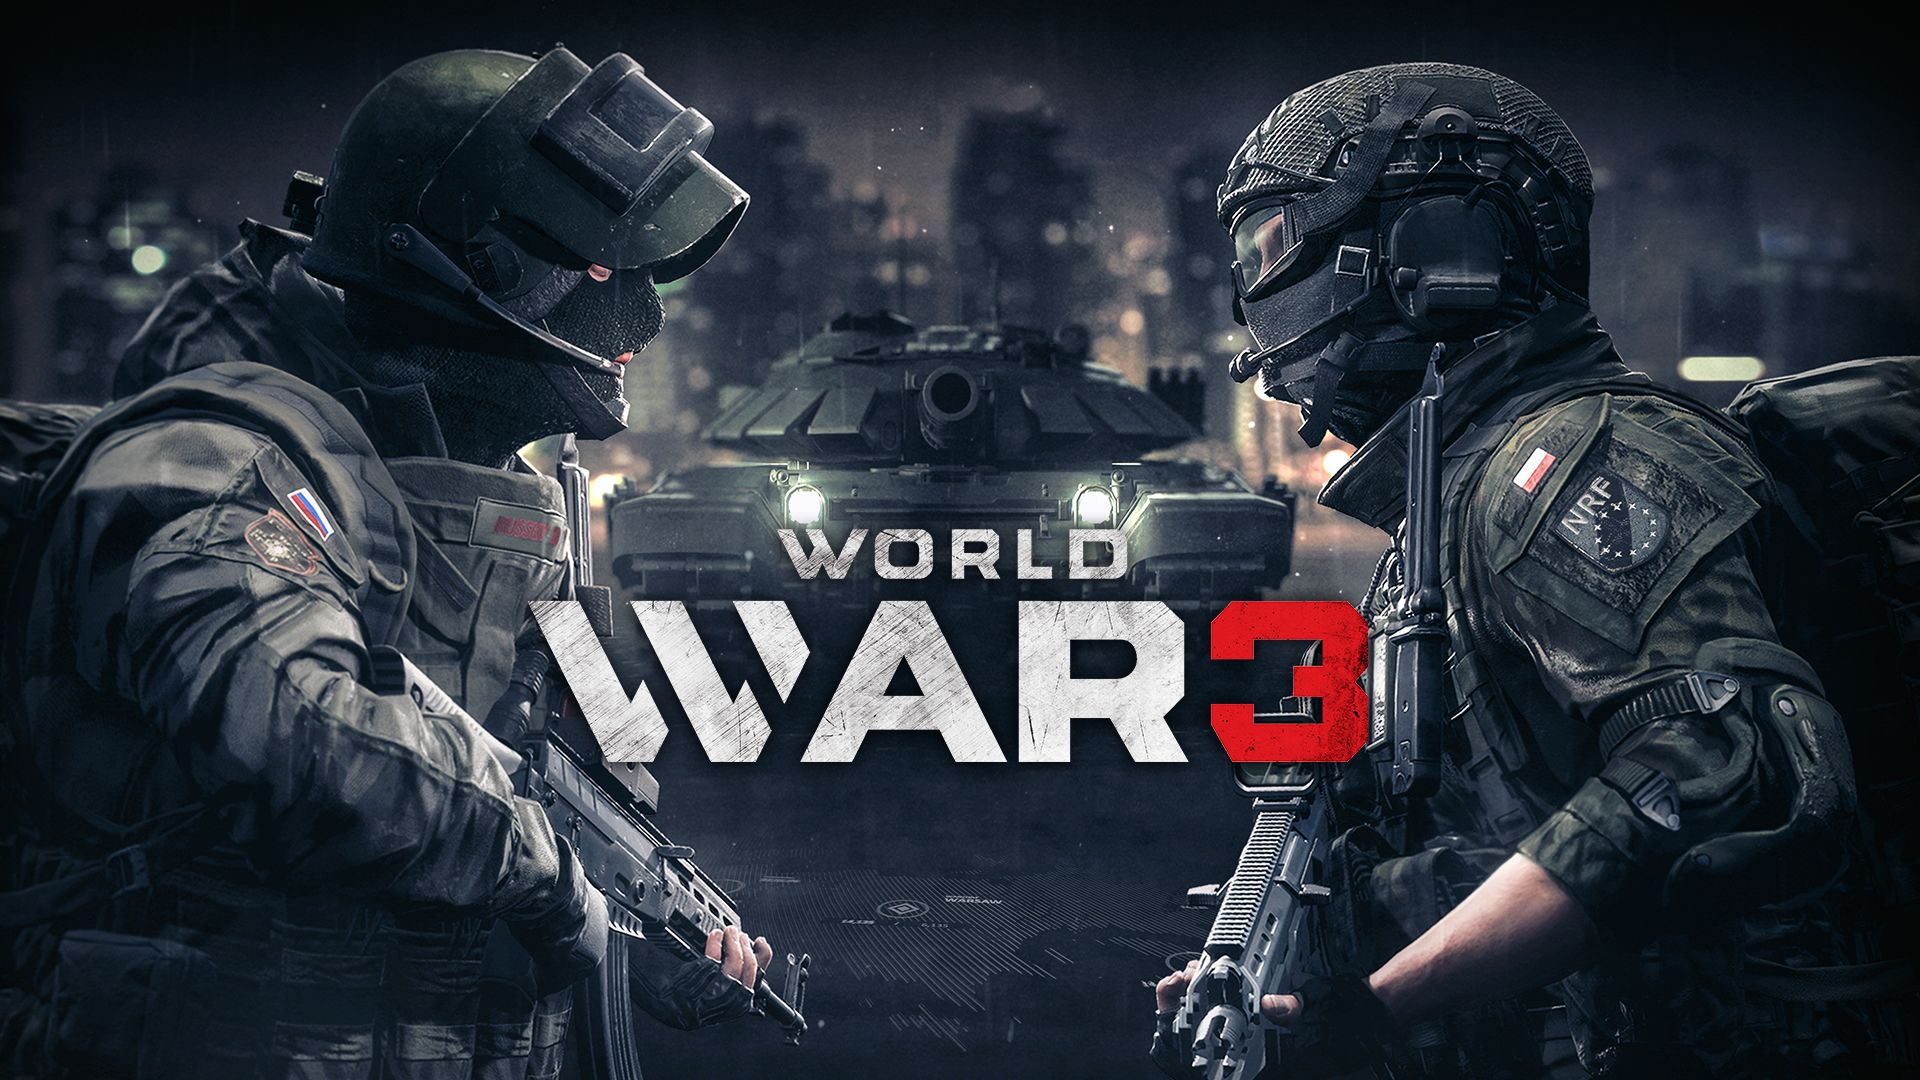 World War 3 PC Game Full Version Trusted Download